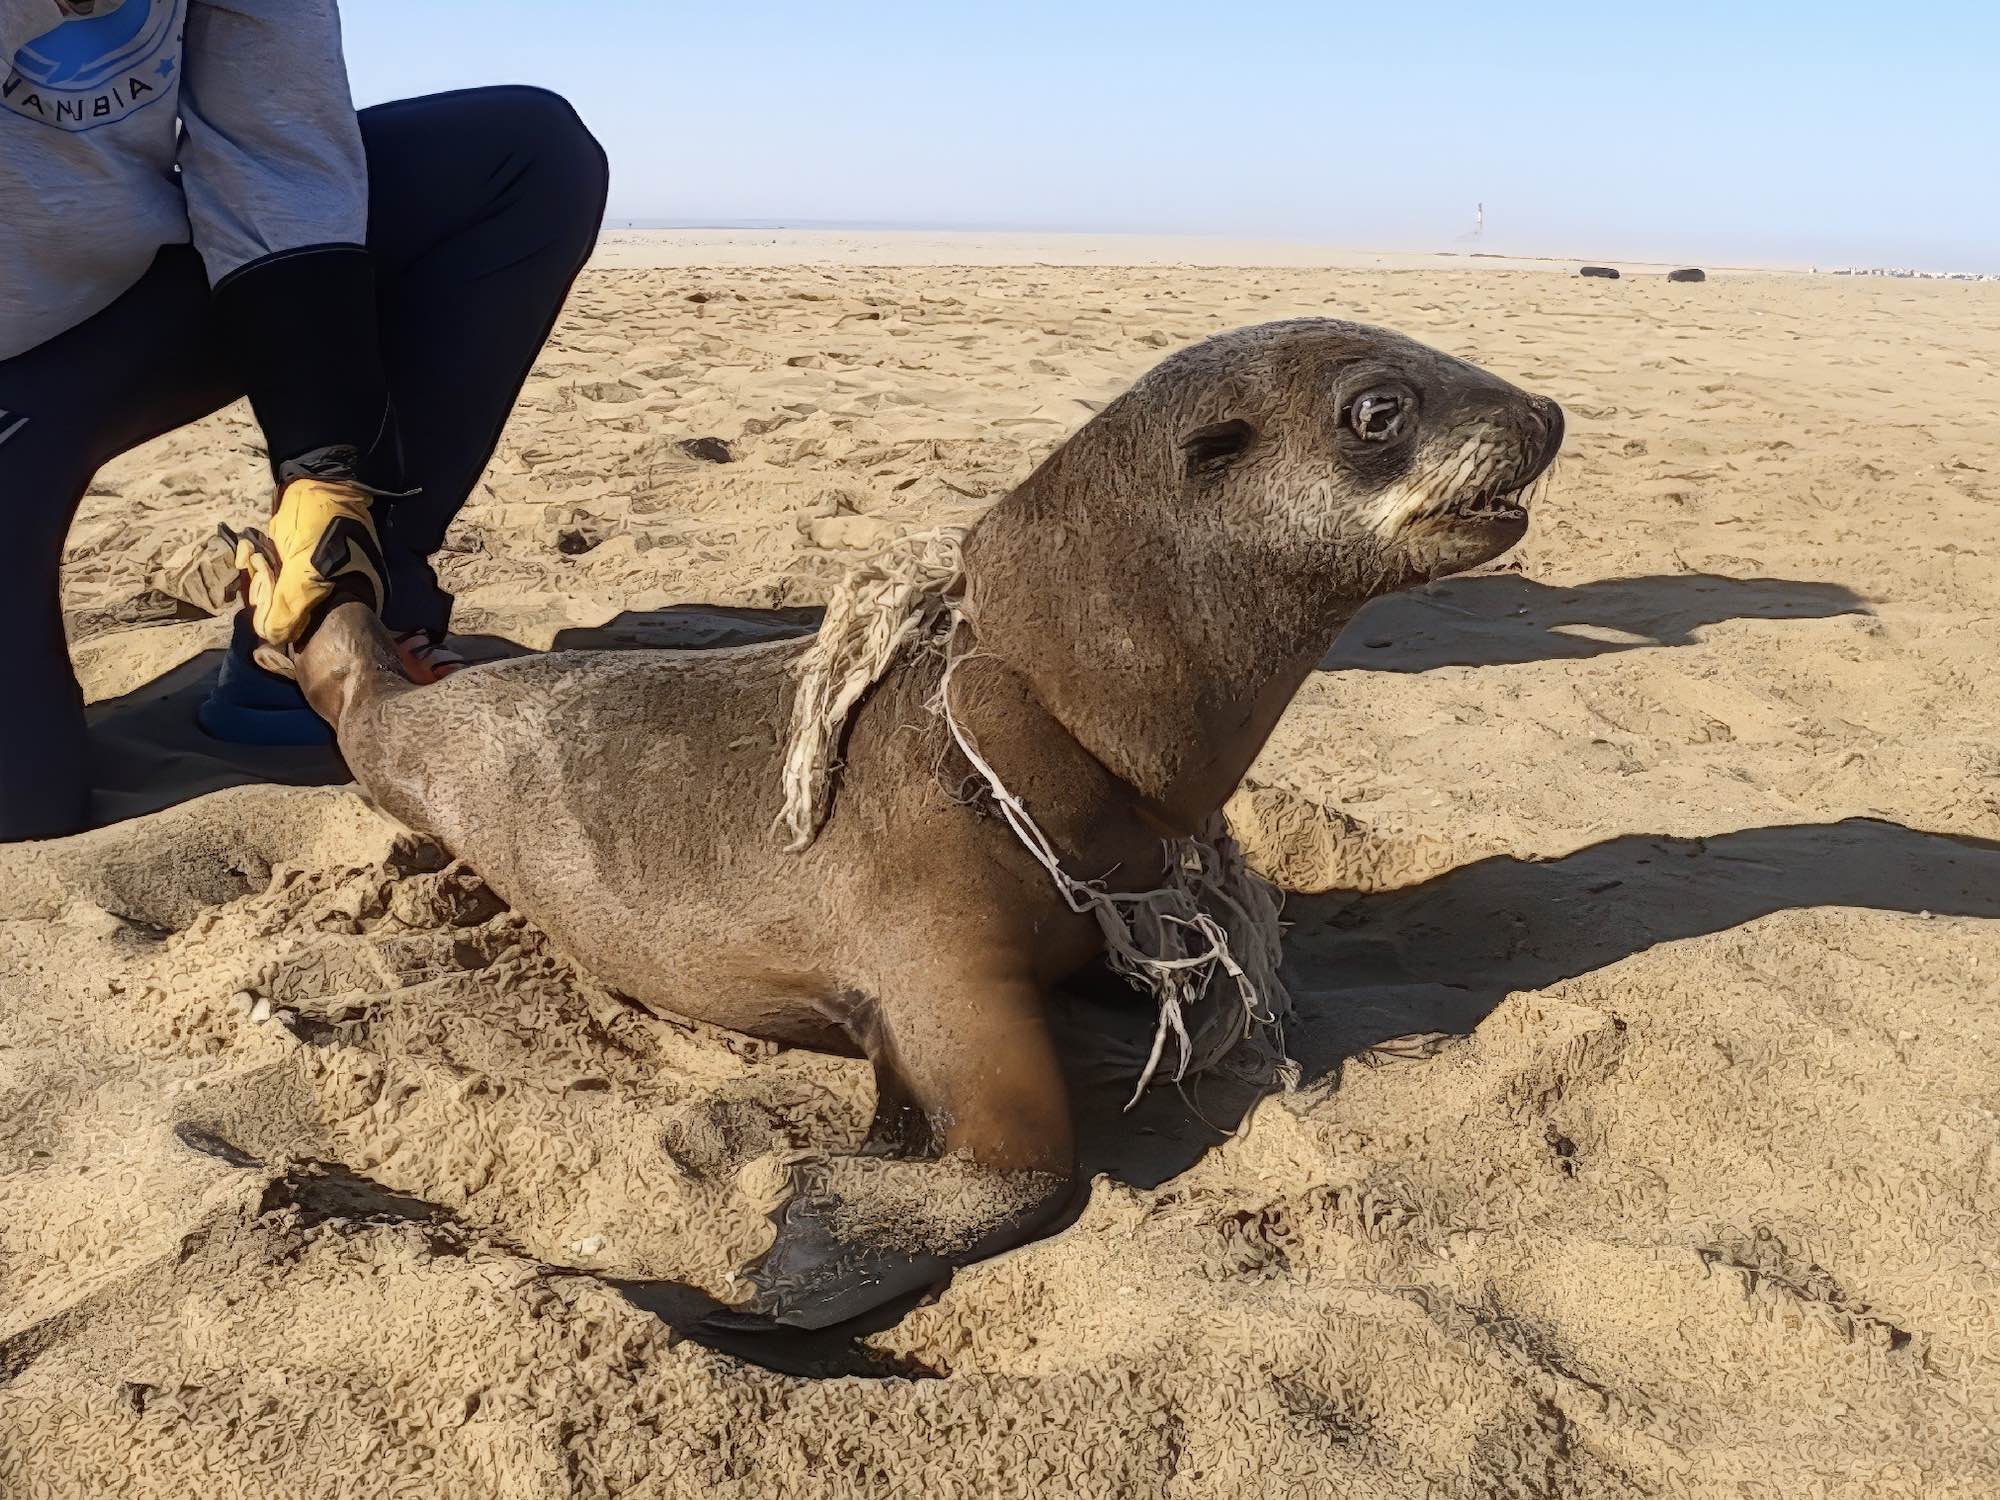 A seal wrapped in fishing nets is held ready by a member of the OCN team.